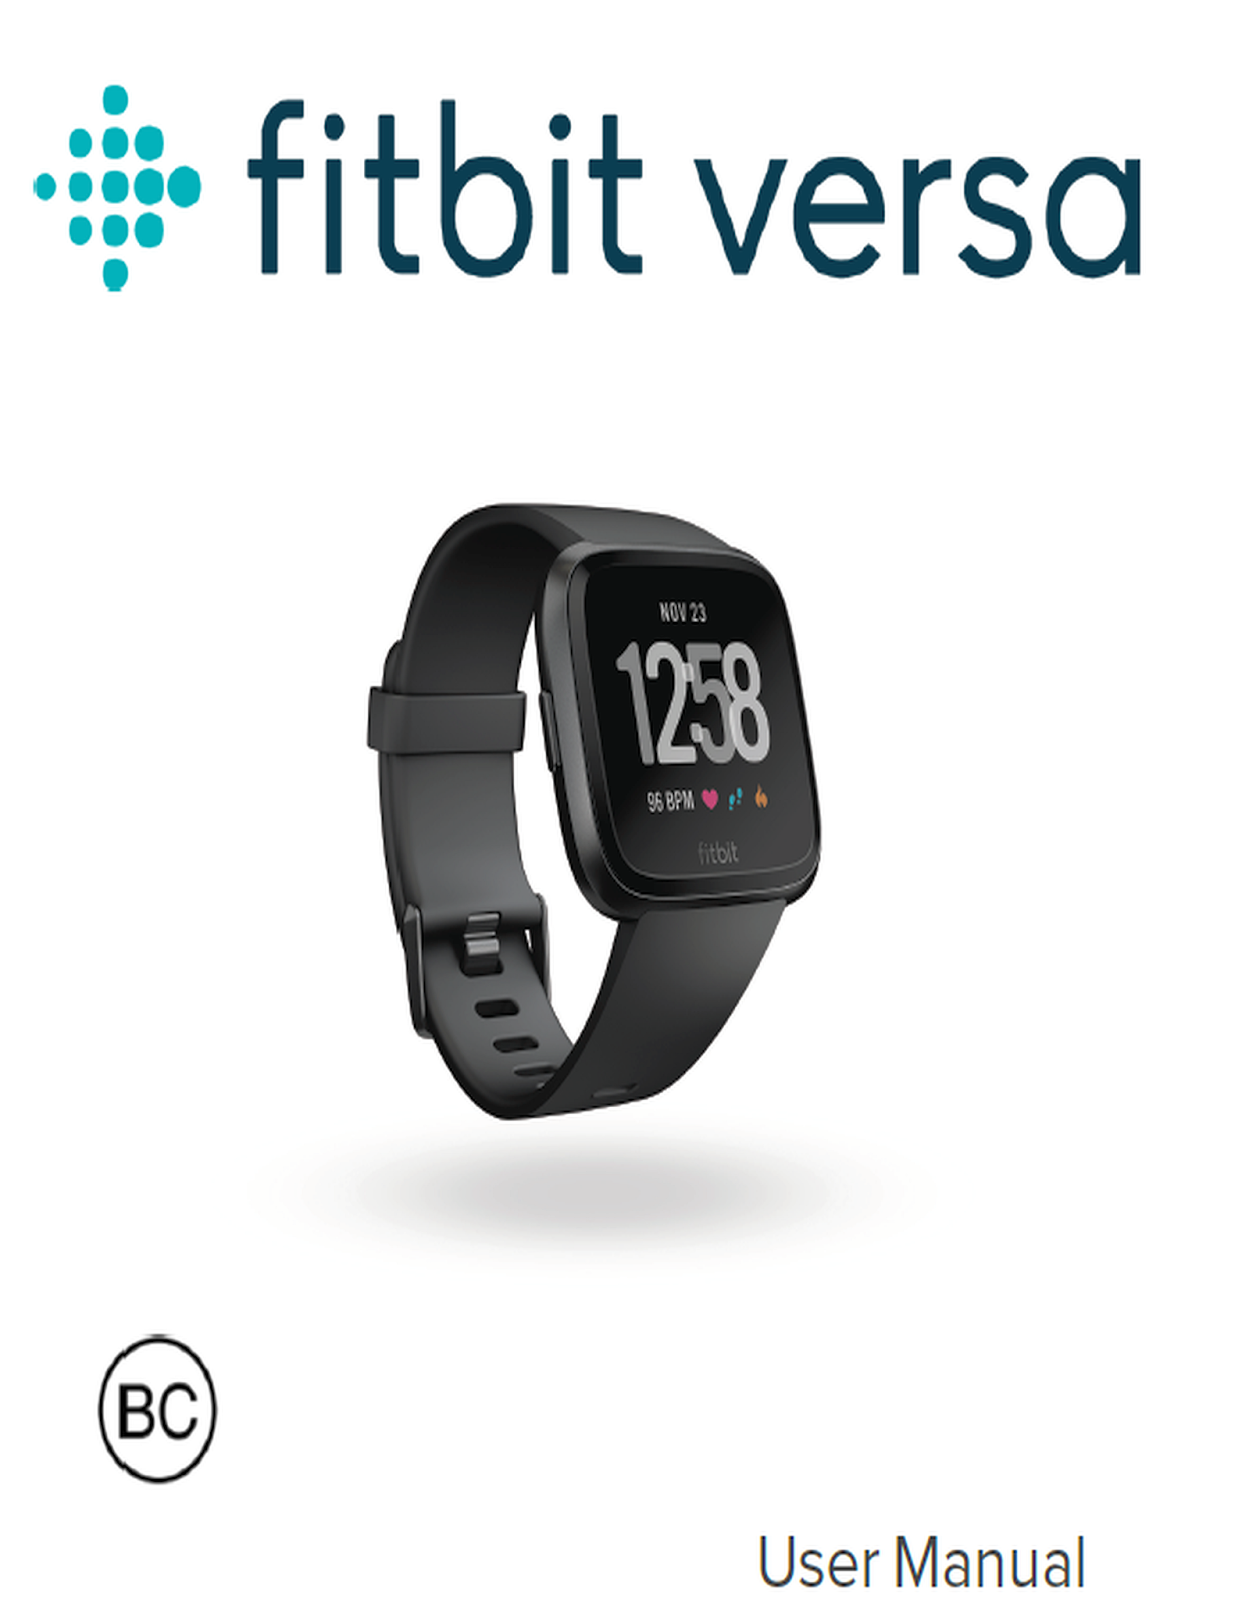 how to set up fitbit versa